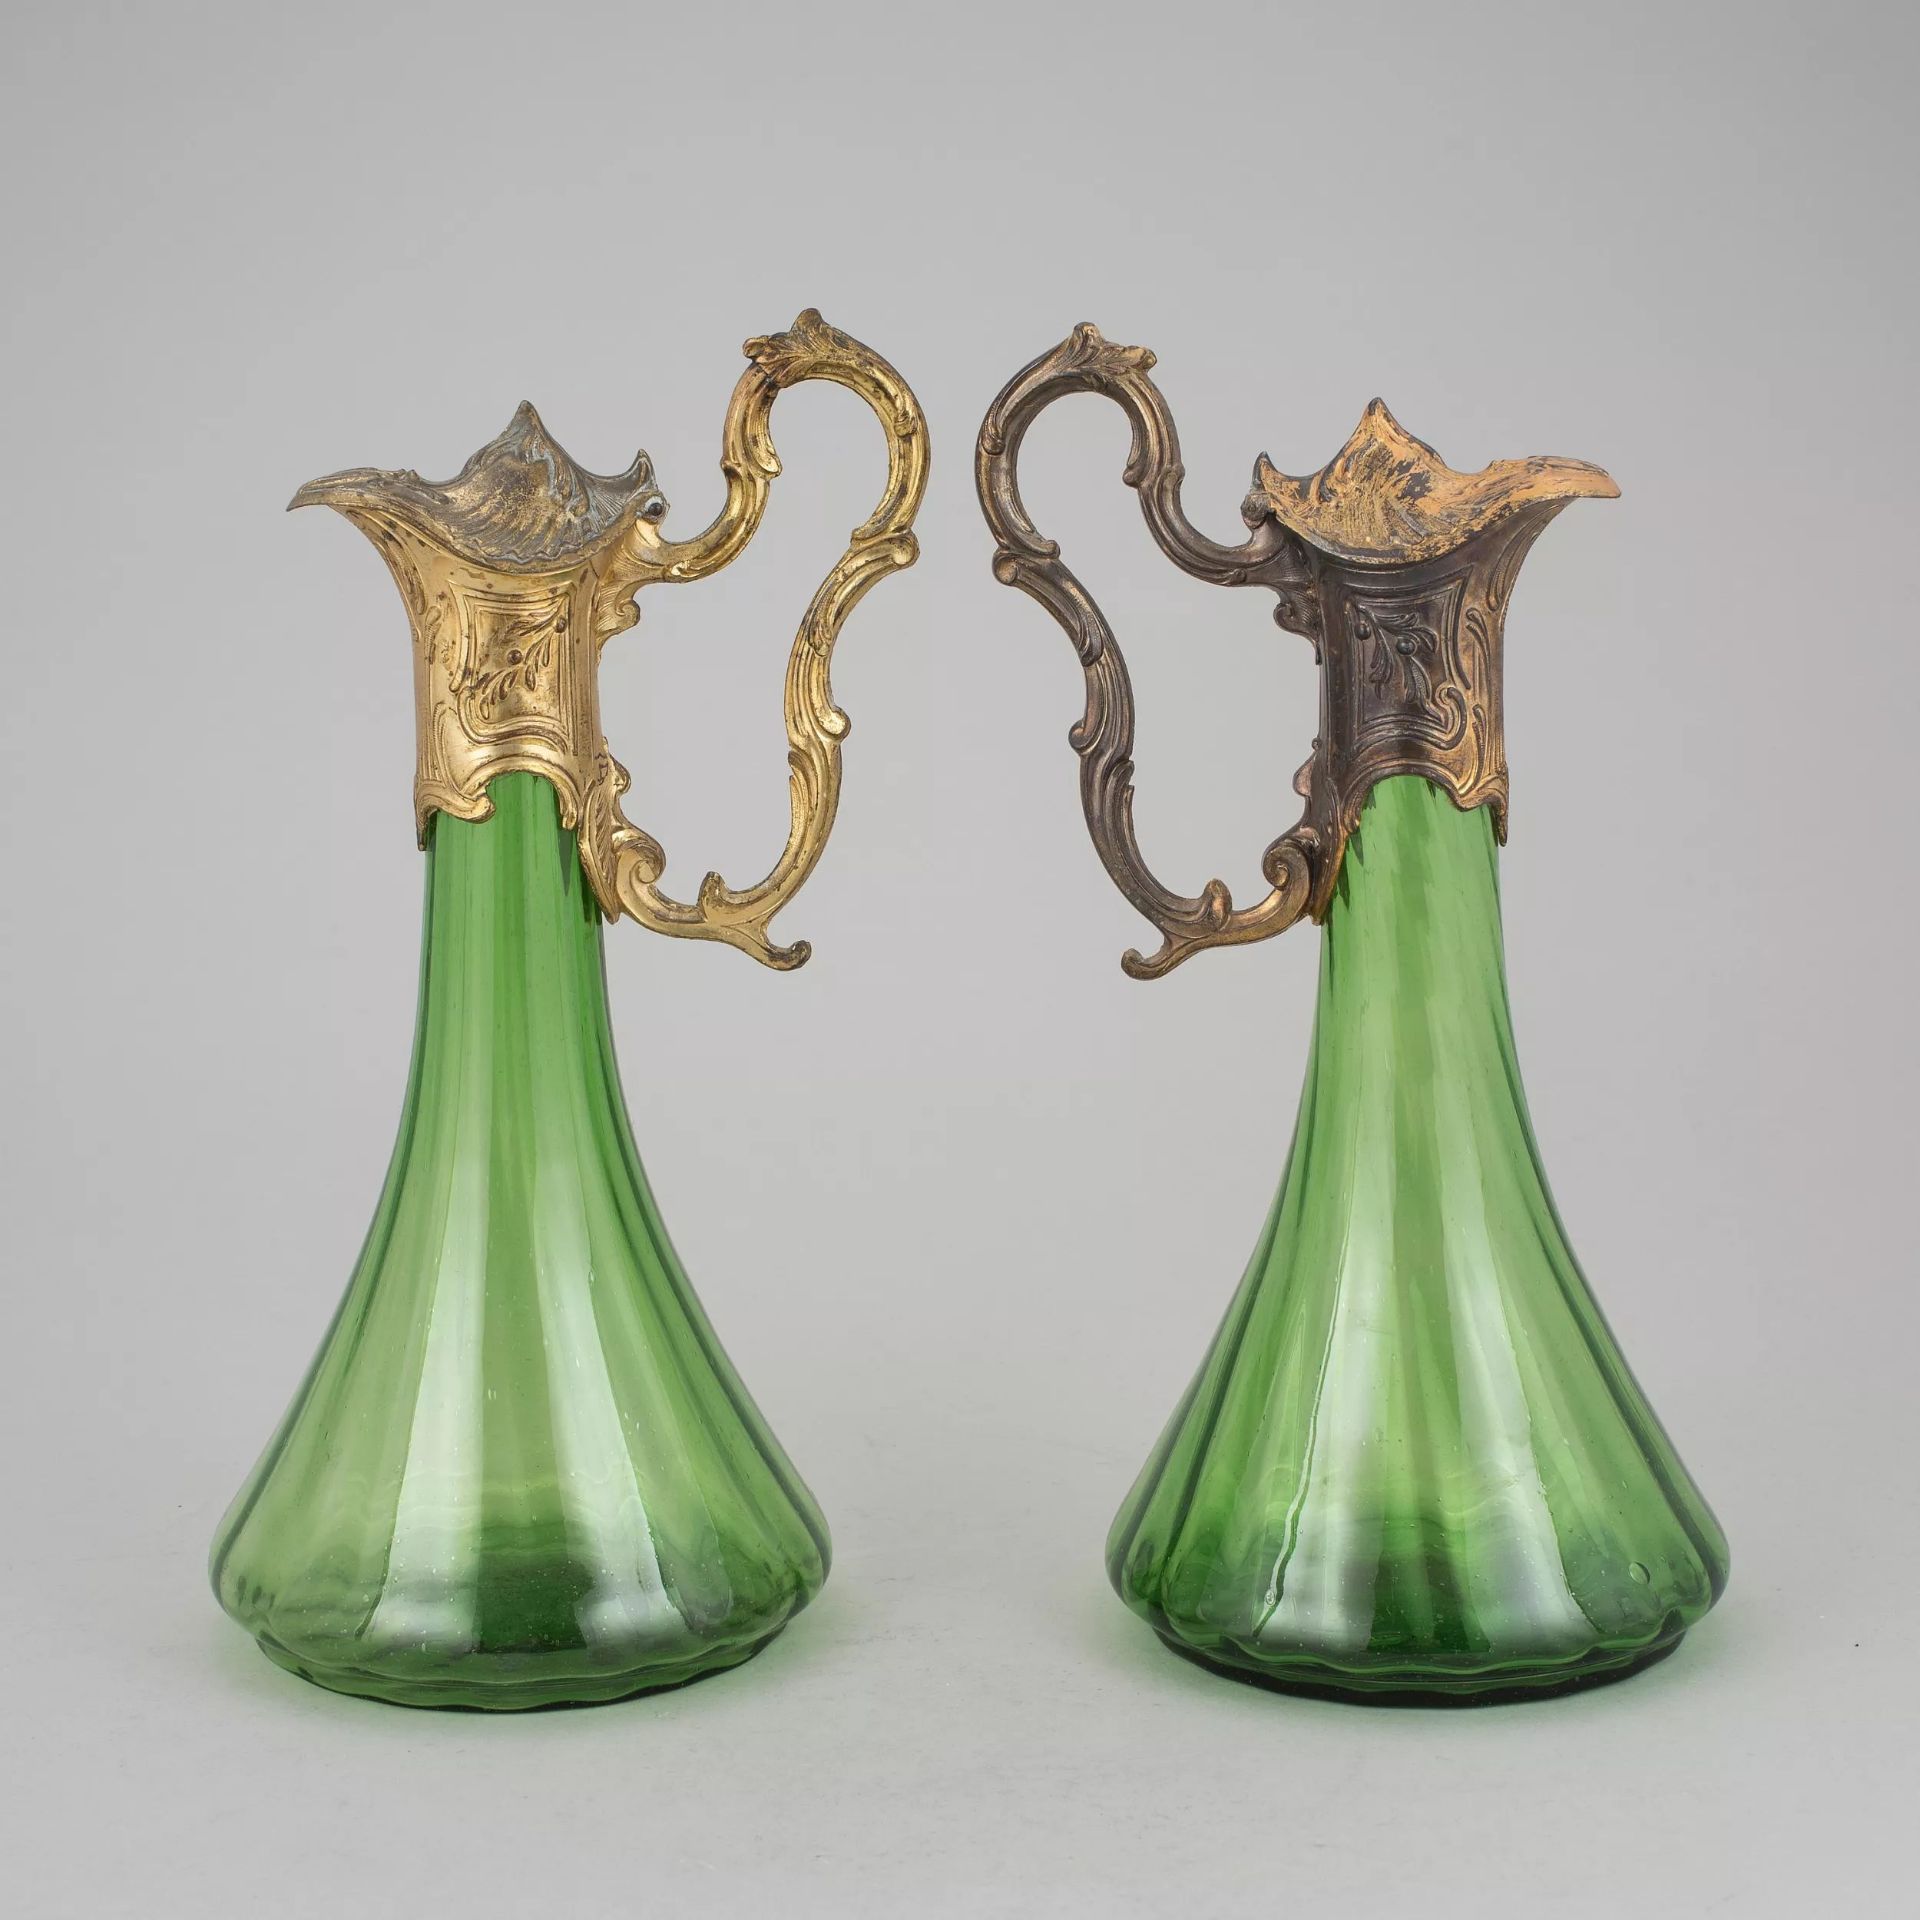 Pair of jugs in Art Nouveau style. - Image 2 of 4